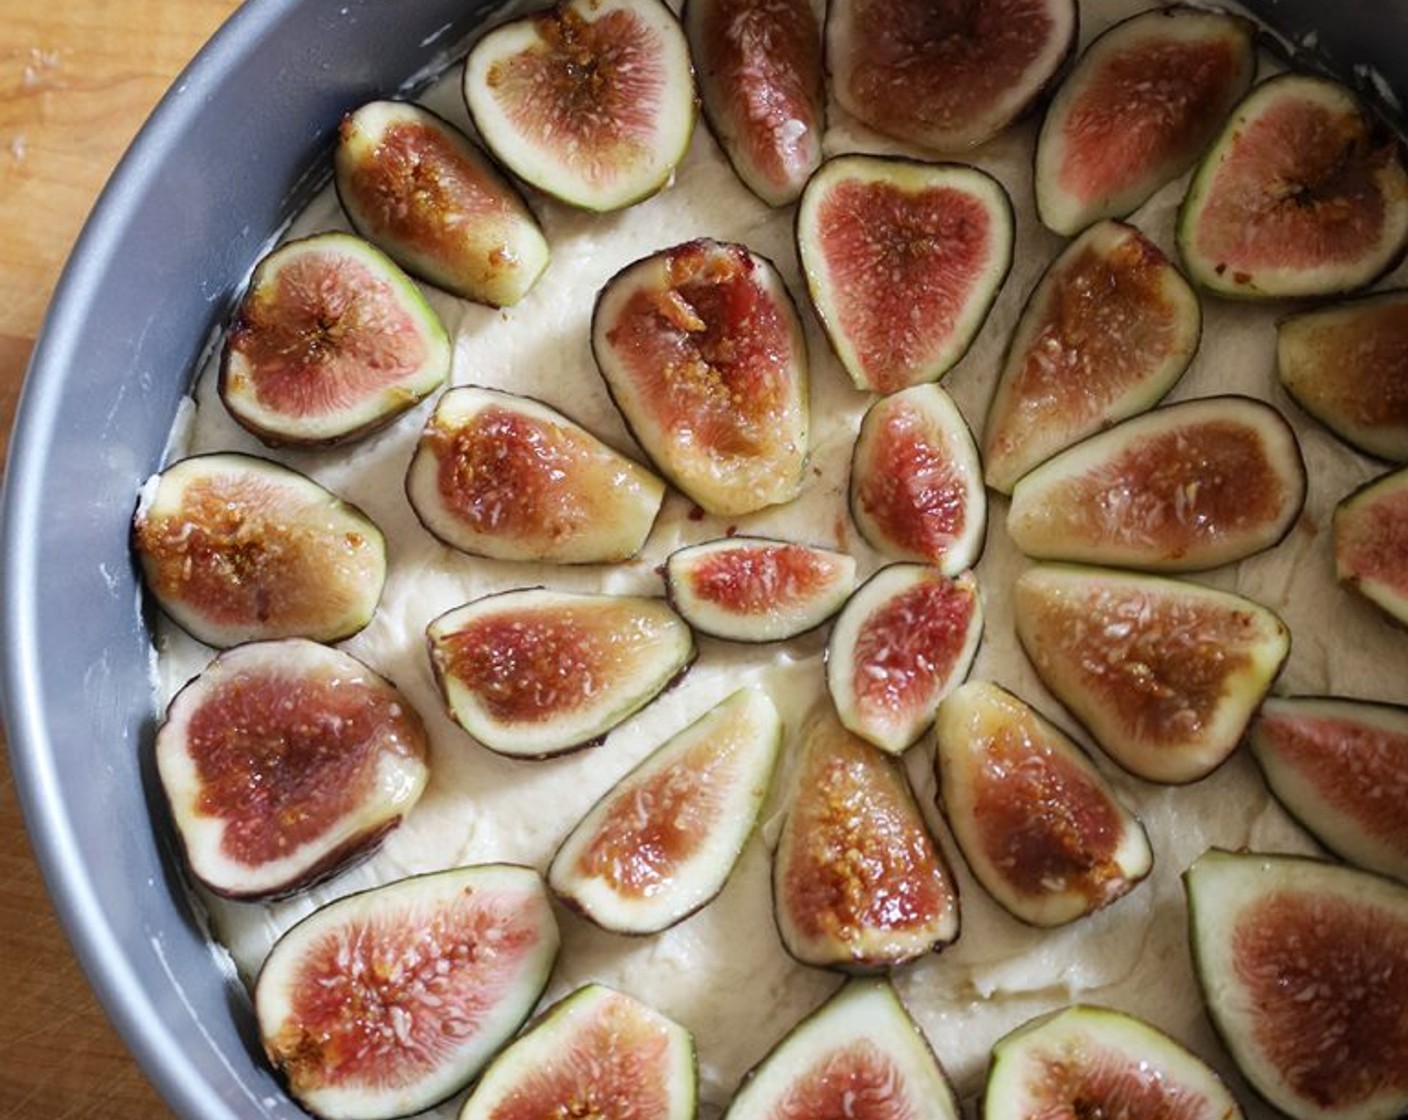 step 9 Arrange the figs, cut sides up, on the cake in concentric circles. Place the cake on a sheet pan.